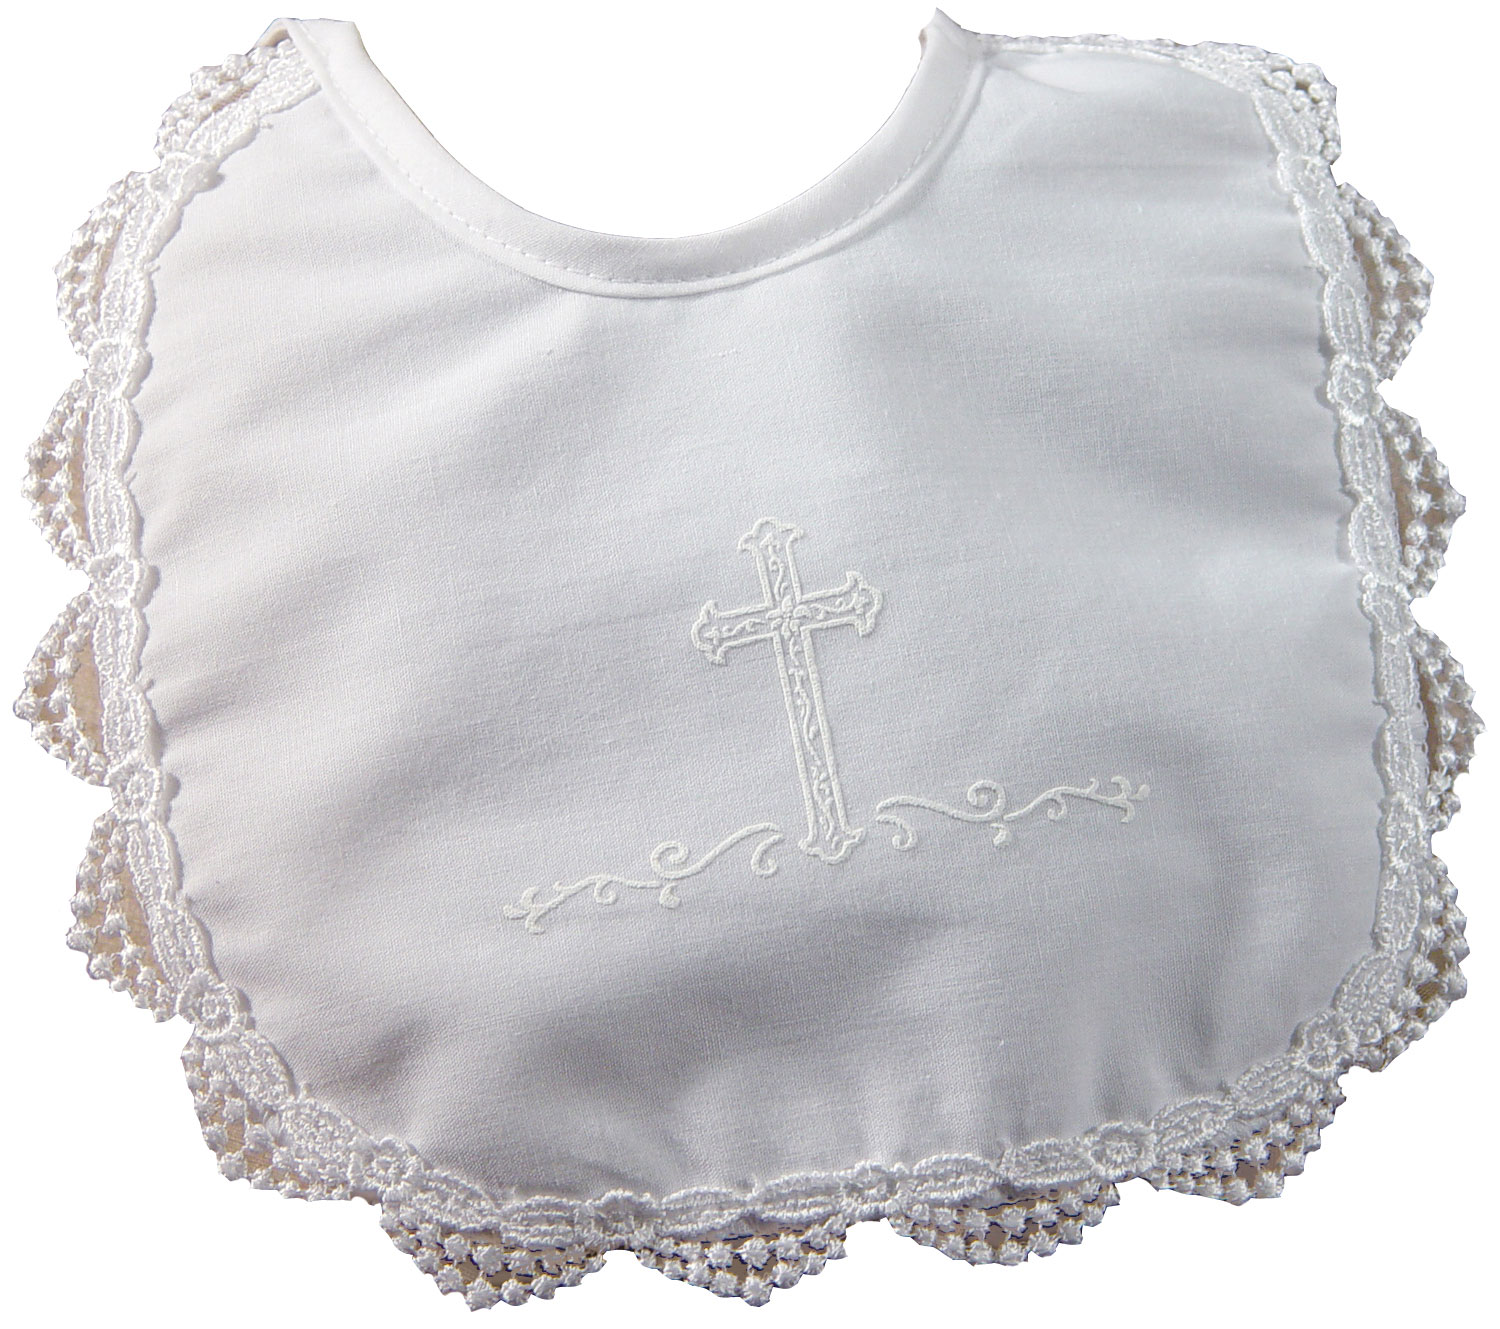 Girls Polycotton Bib with Screened Cross and Venise Edge - Little Things Mean a Lot